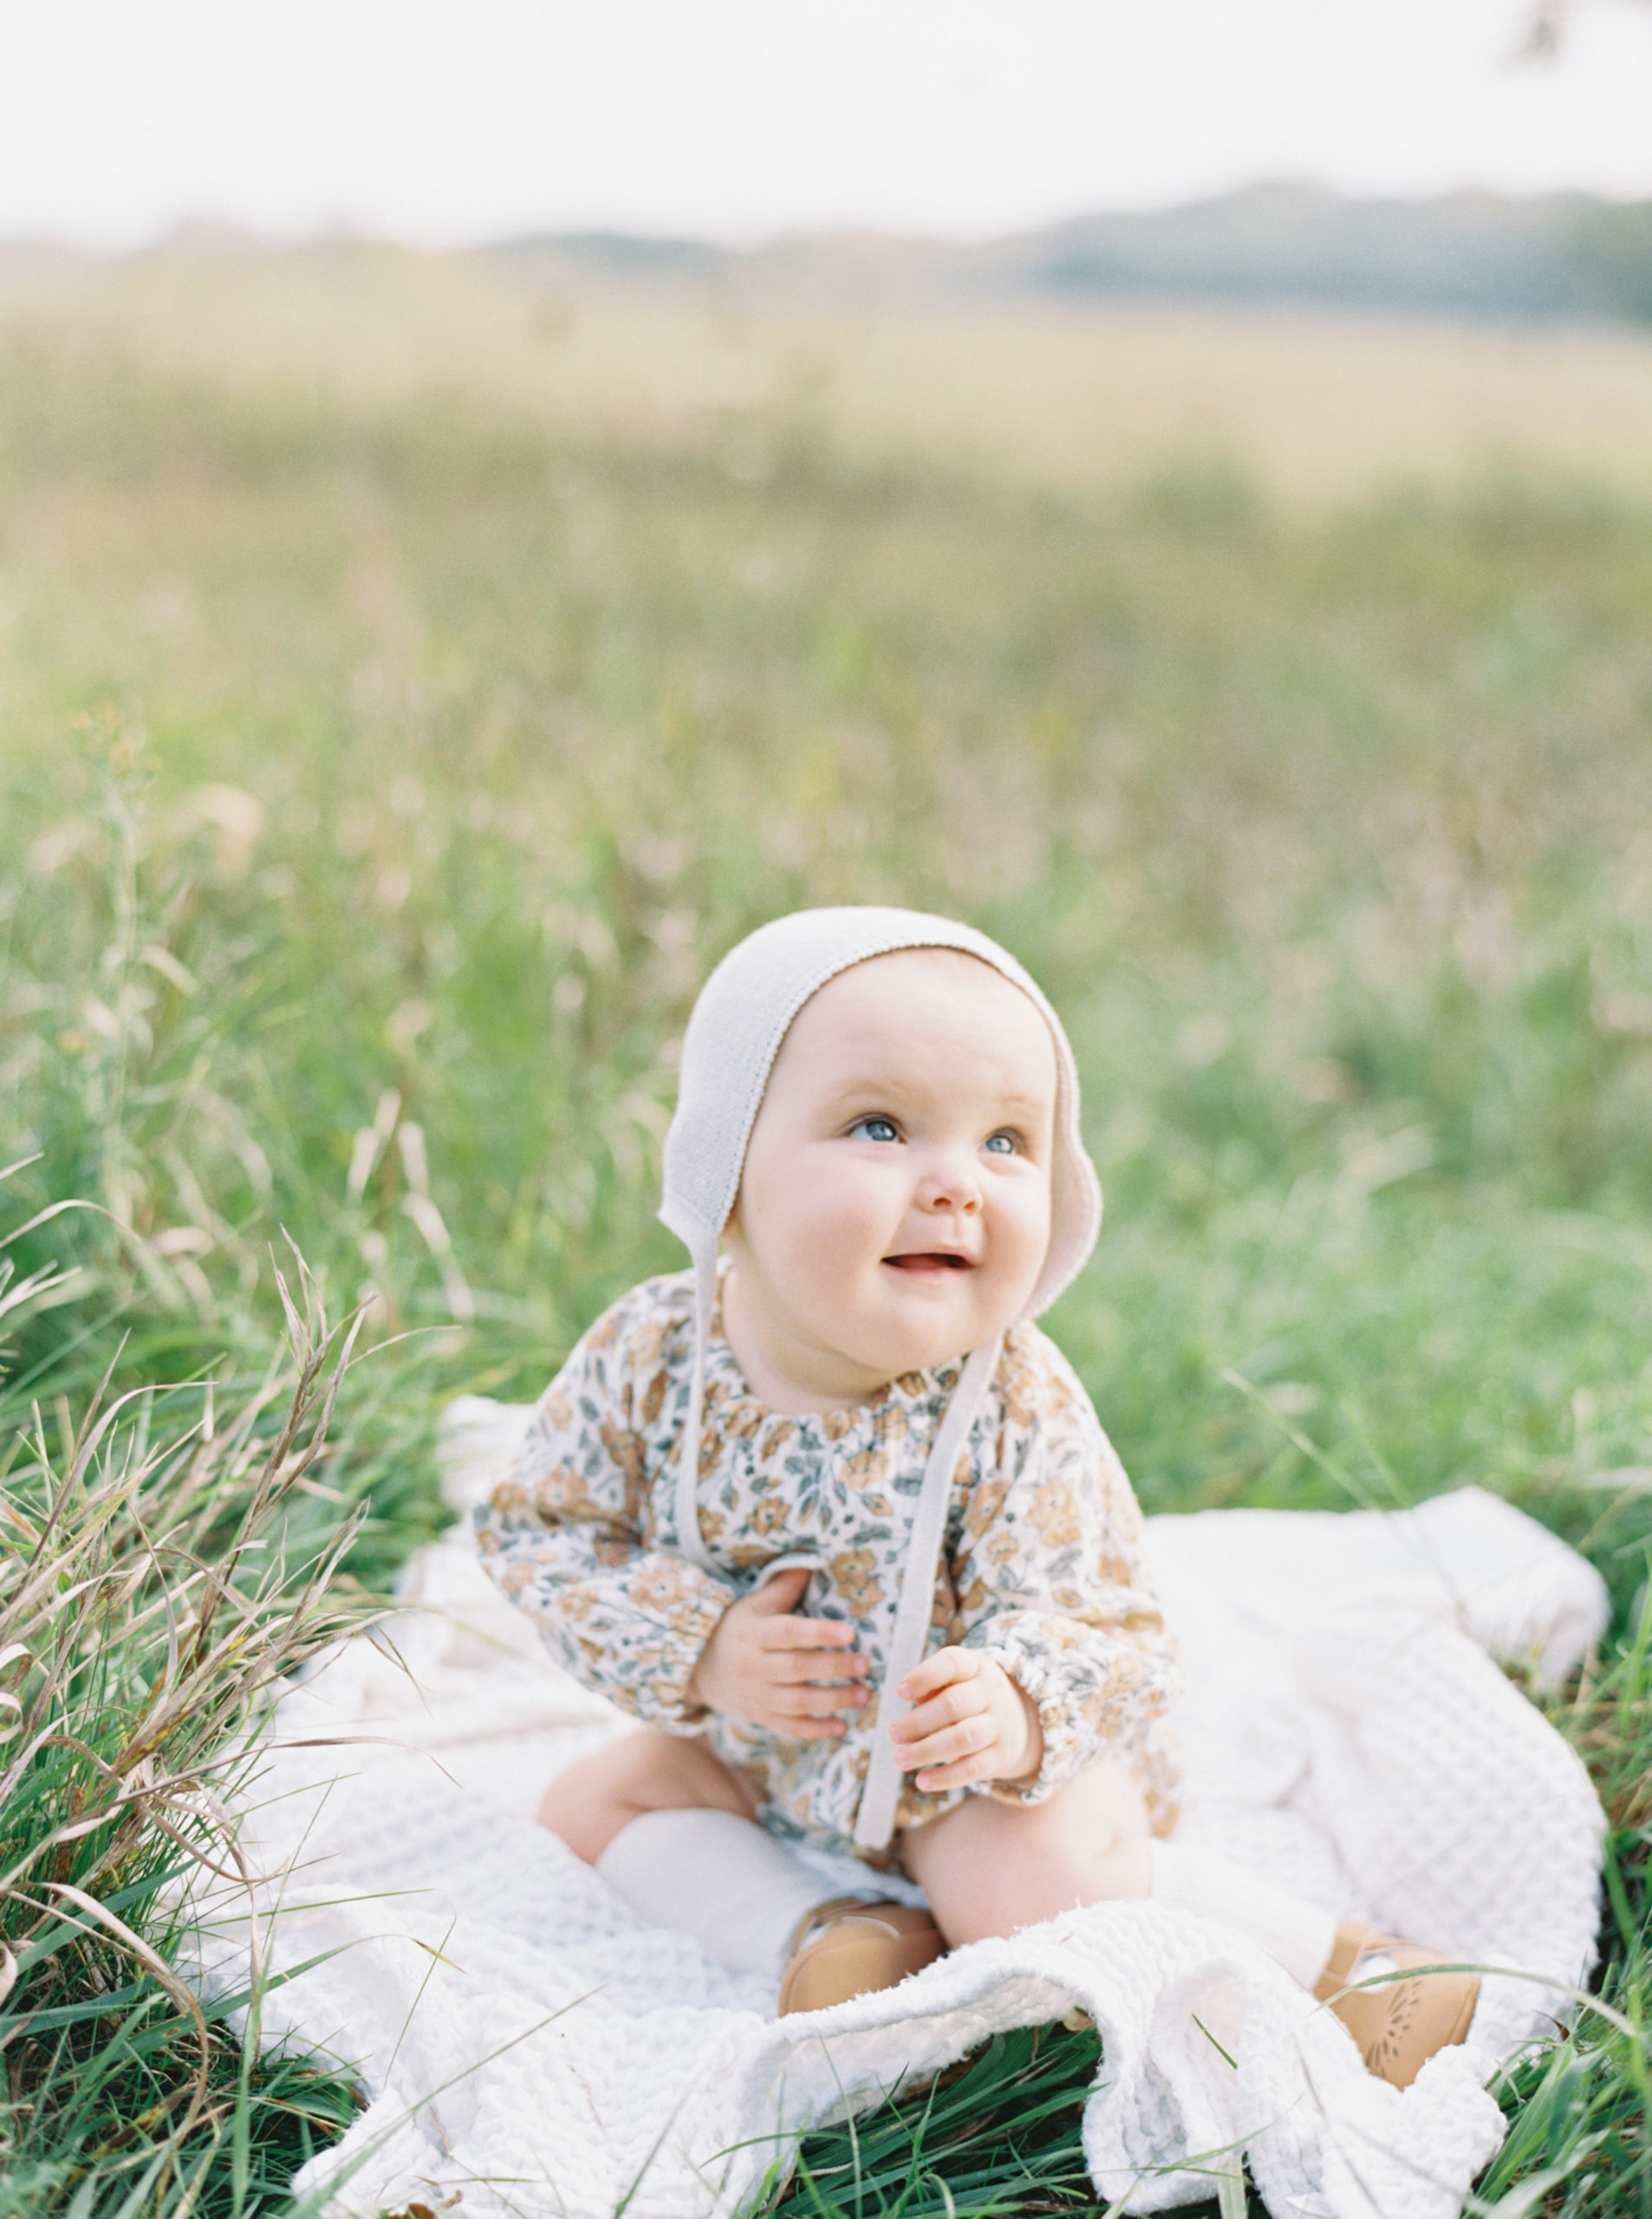 Baby playing in a grassy Hartland field on a beautiful Fall afternoon